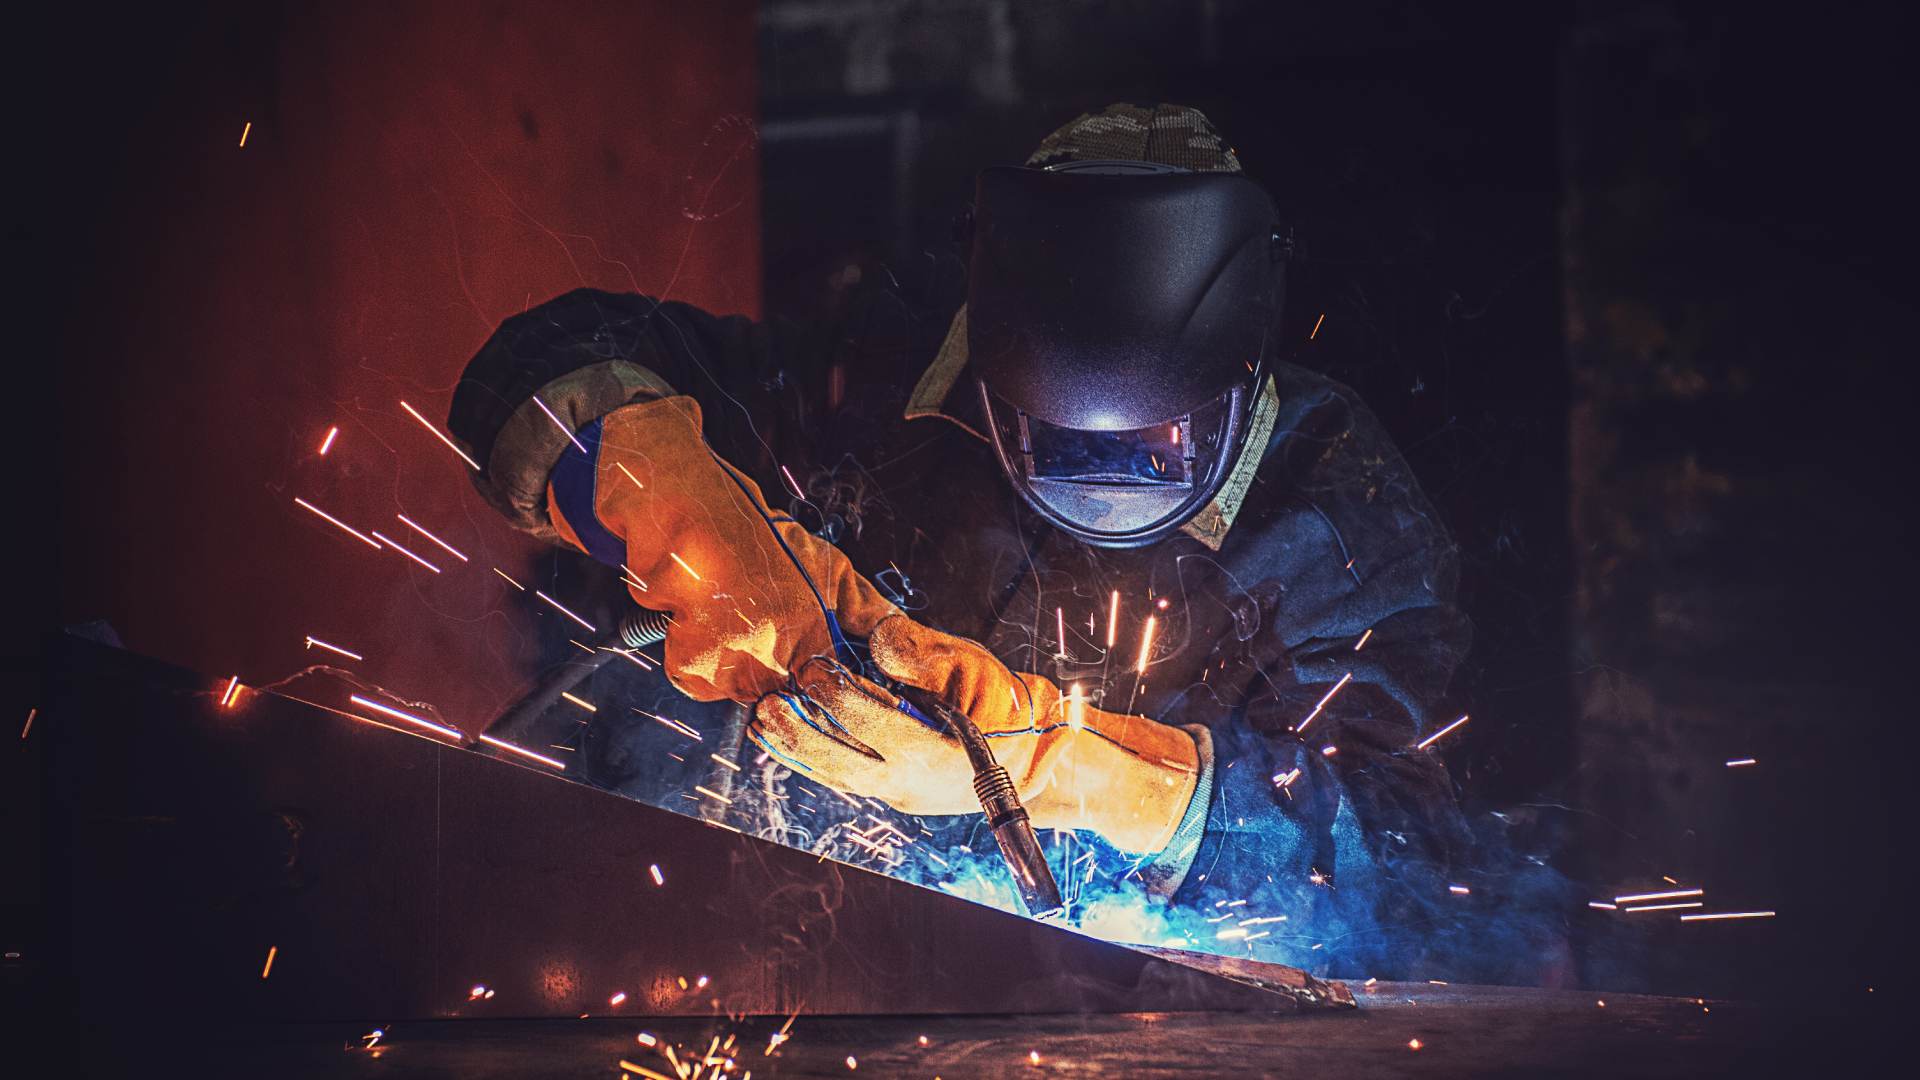 A metal fabrication worker wearing a protective mask and gloves as they hold a welding tool to weld metal in a workshop.